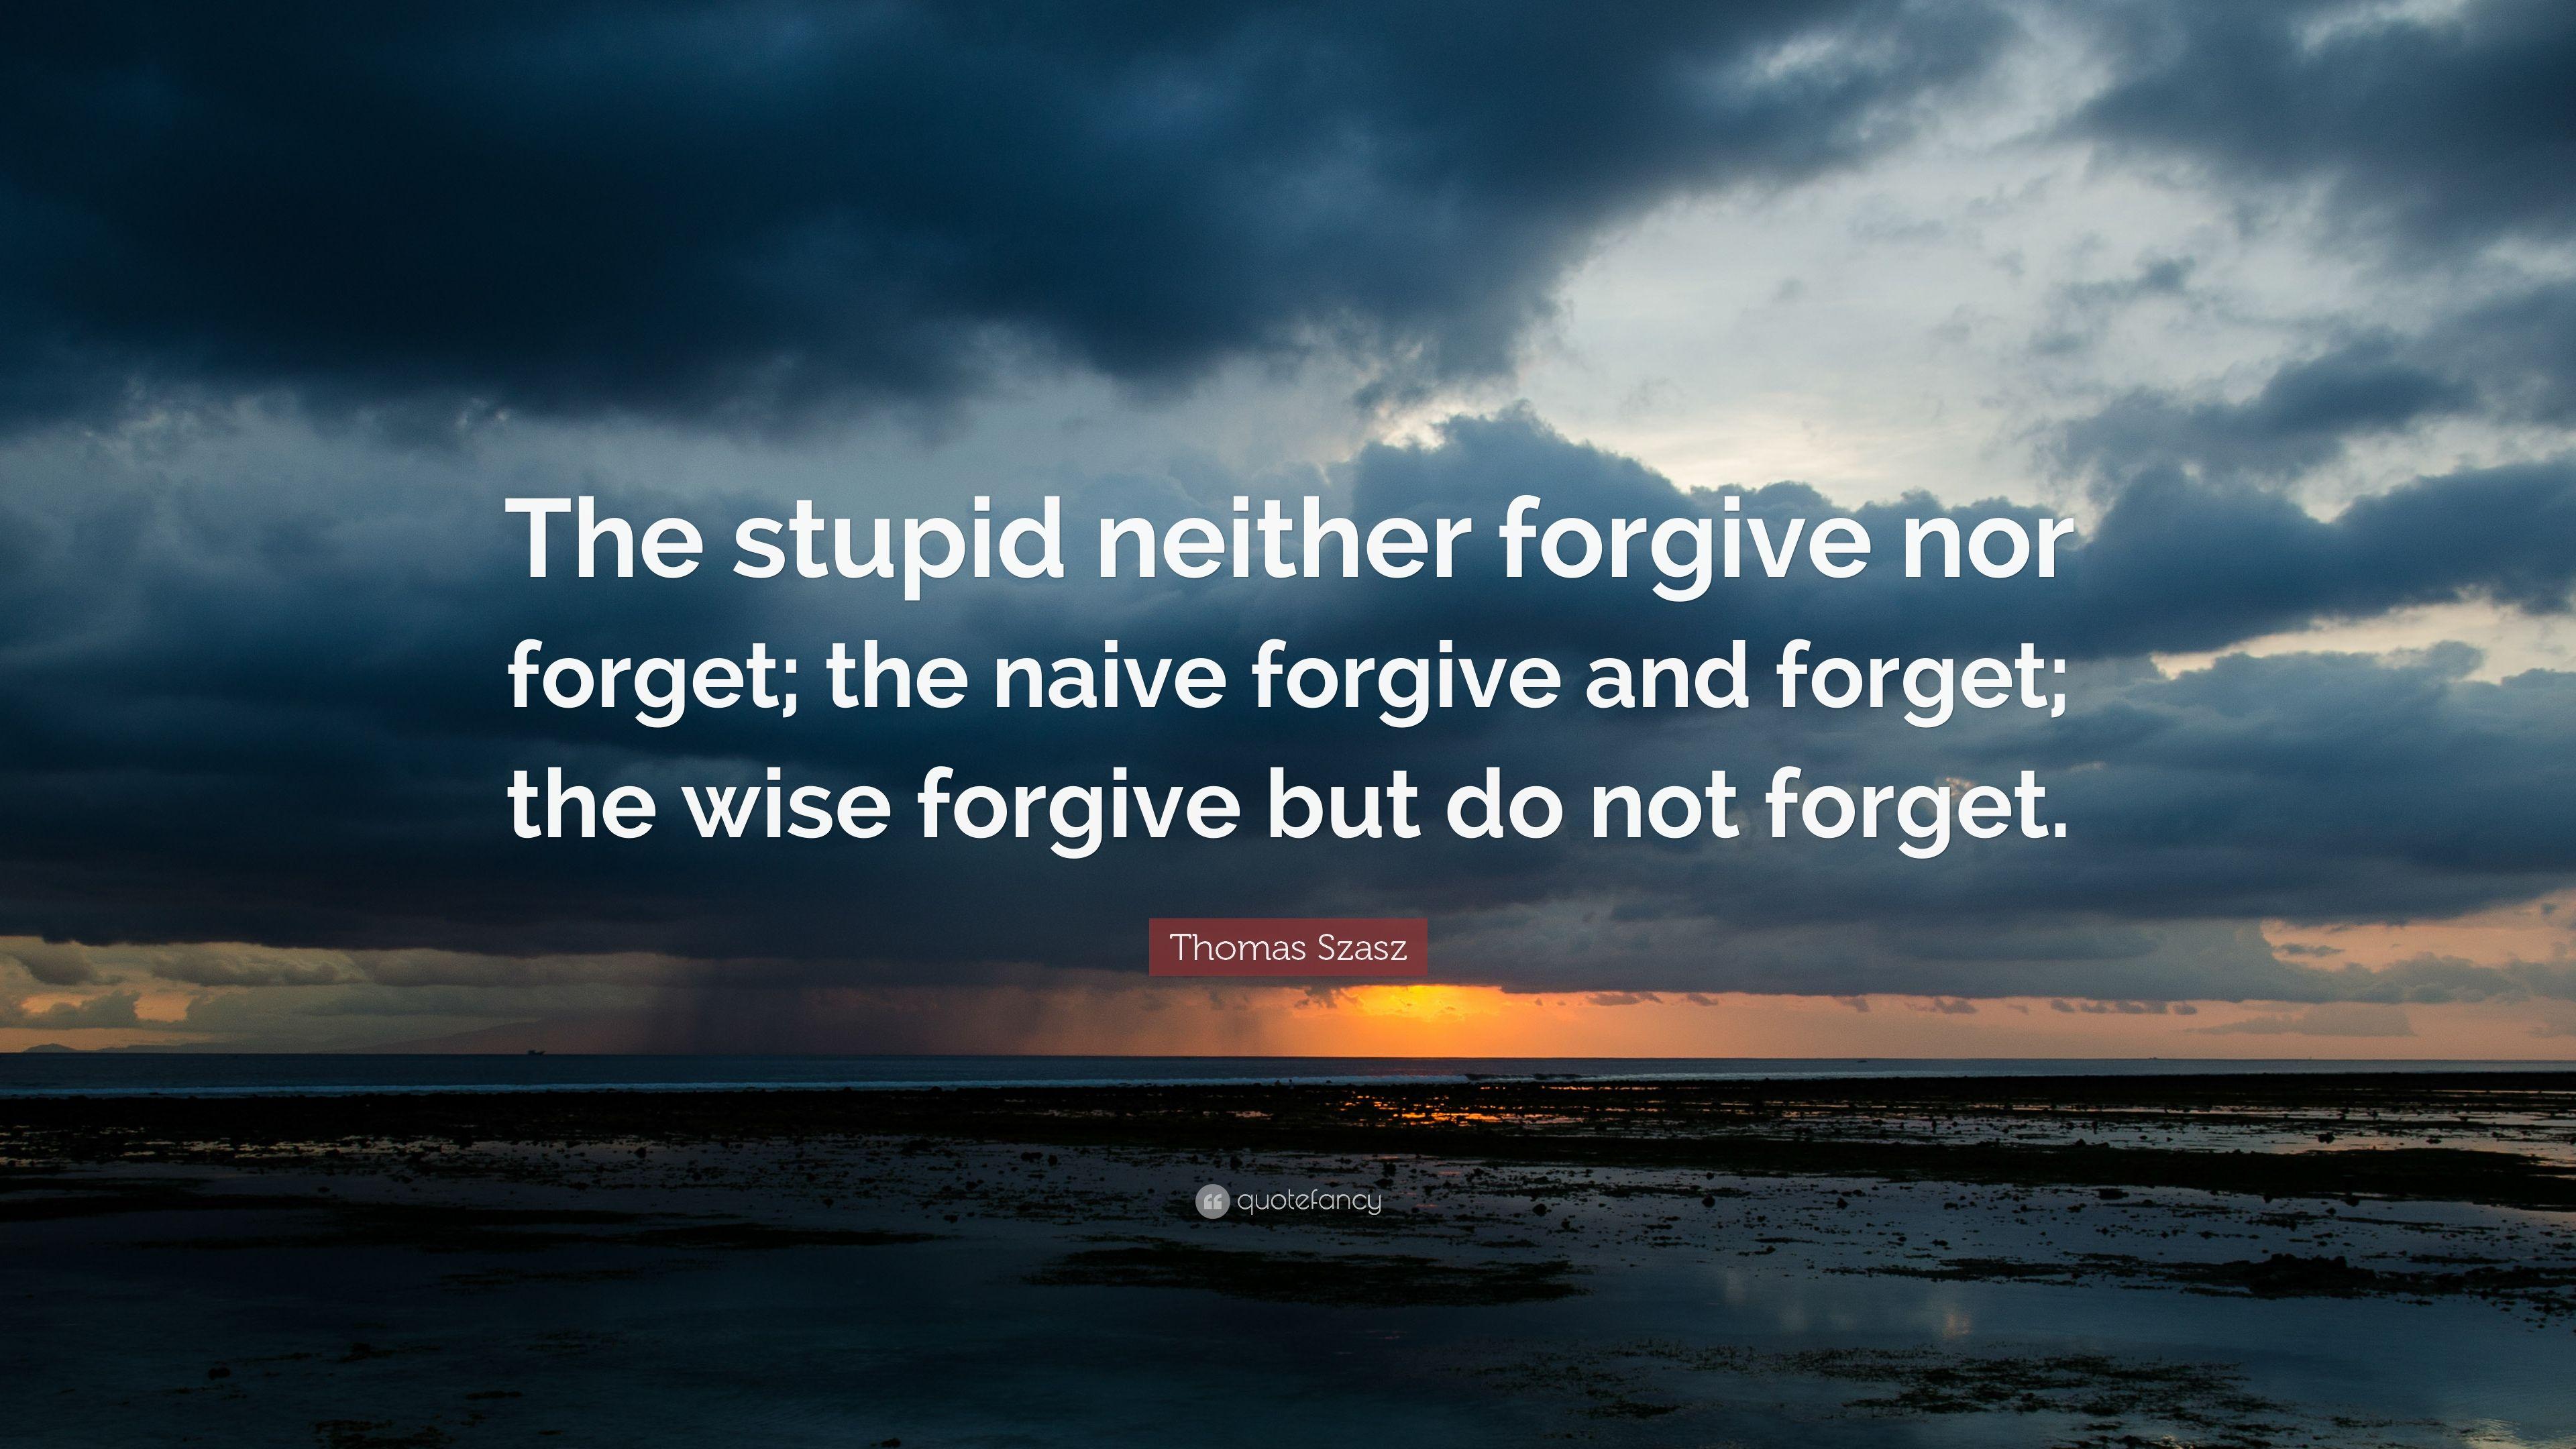 Thomas Stephen Szasz Quote: “The stupid neither forgive nor forget